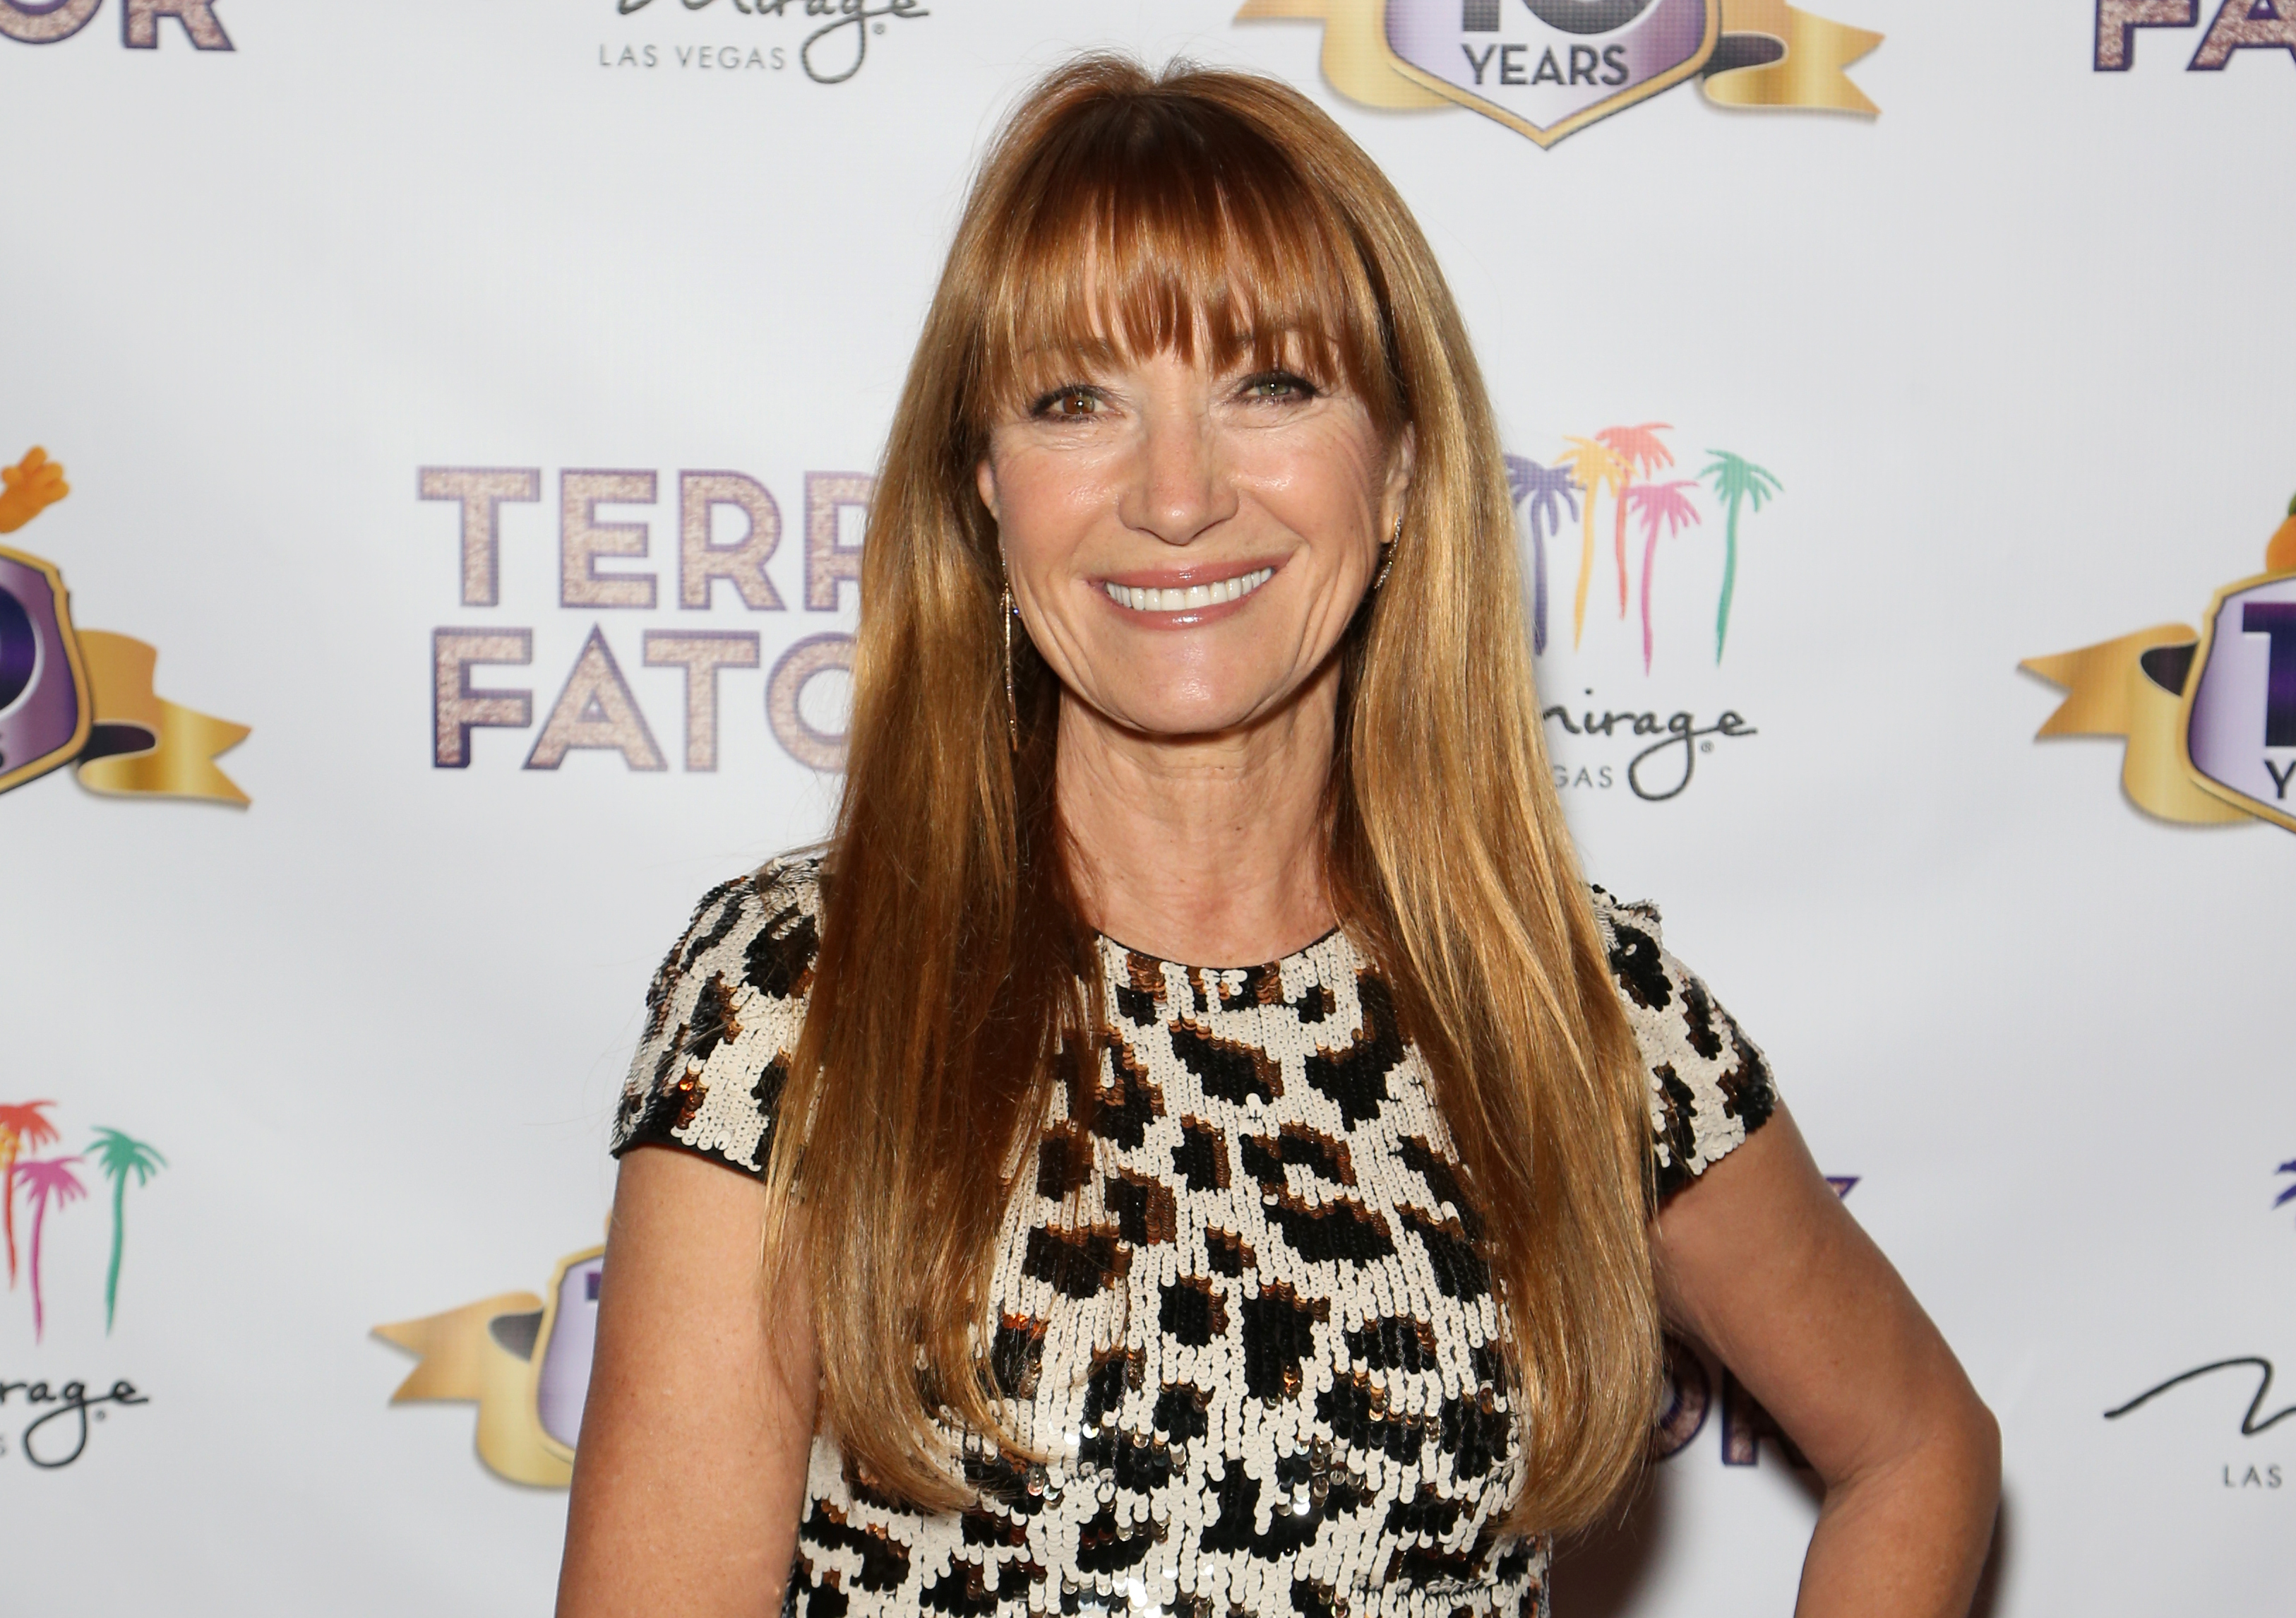 Jane Seymour at Terry Fator's 10th anniversary show in Las Vegas, Nevada on March 15, 2019 | Source: Getty Images